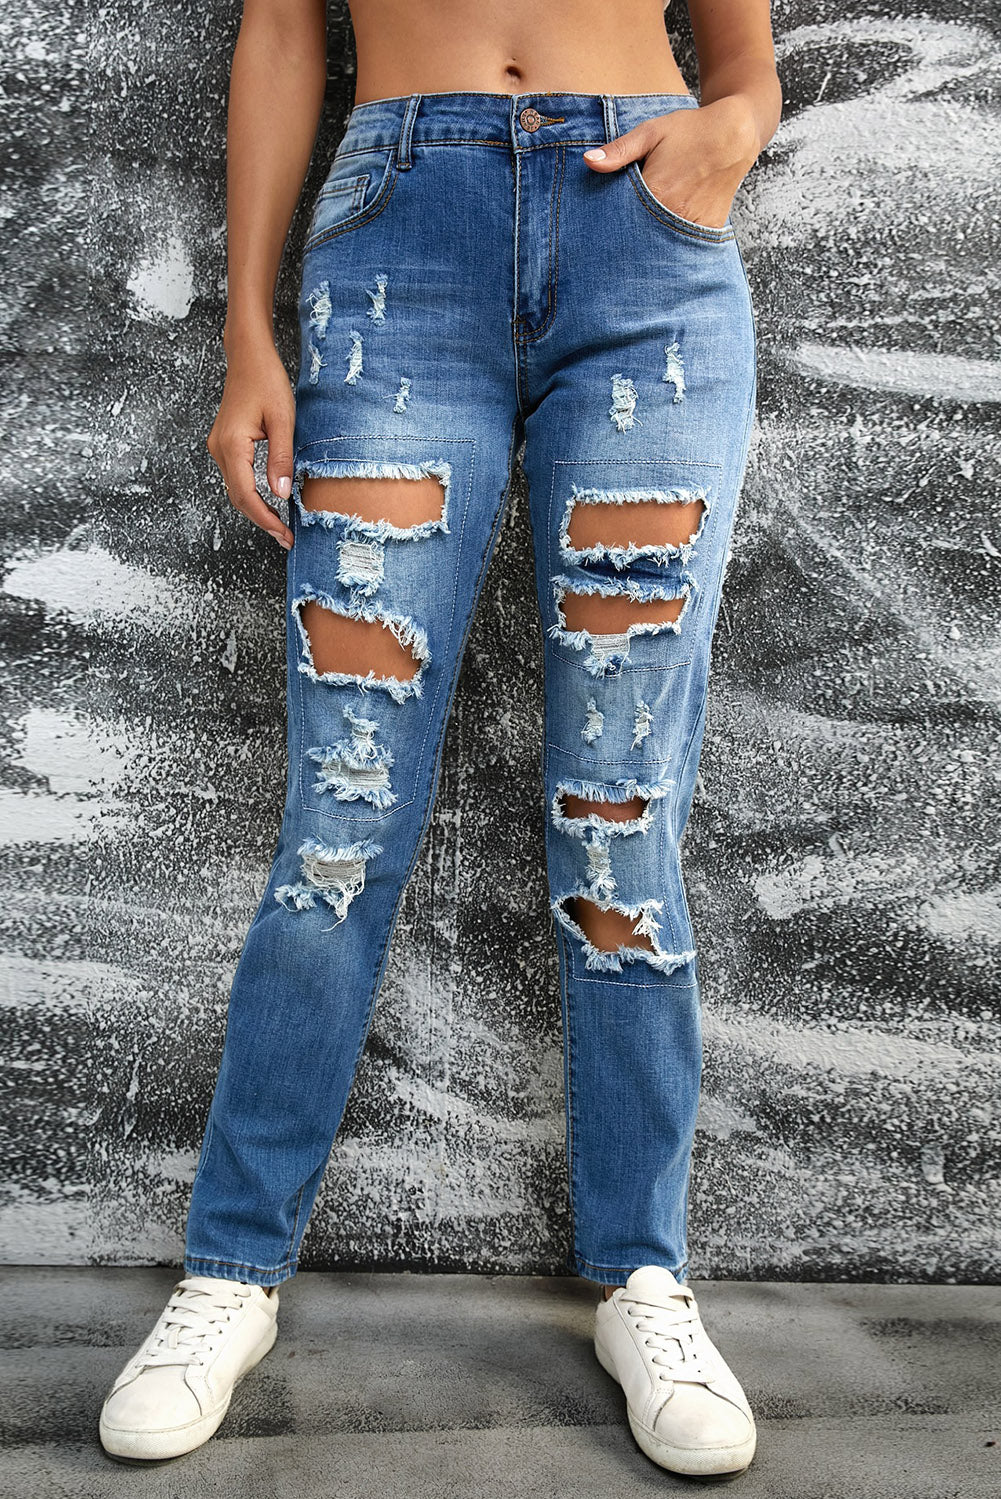 Sky Blue Women's Ripped Boyfriend Jeans Buttoned Pockets Distressed Jeans LC782725-4